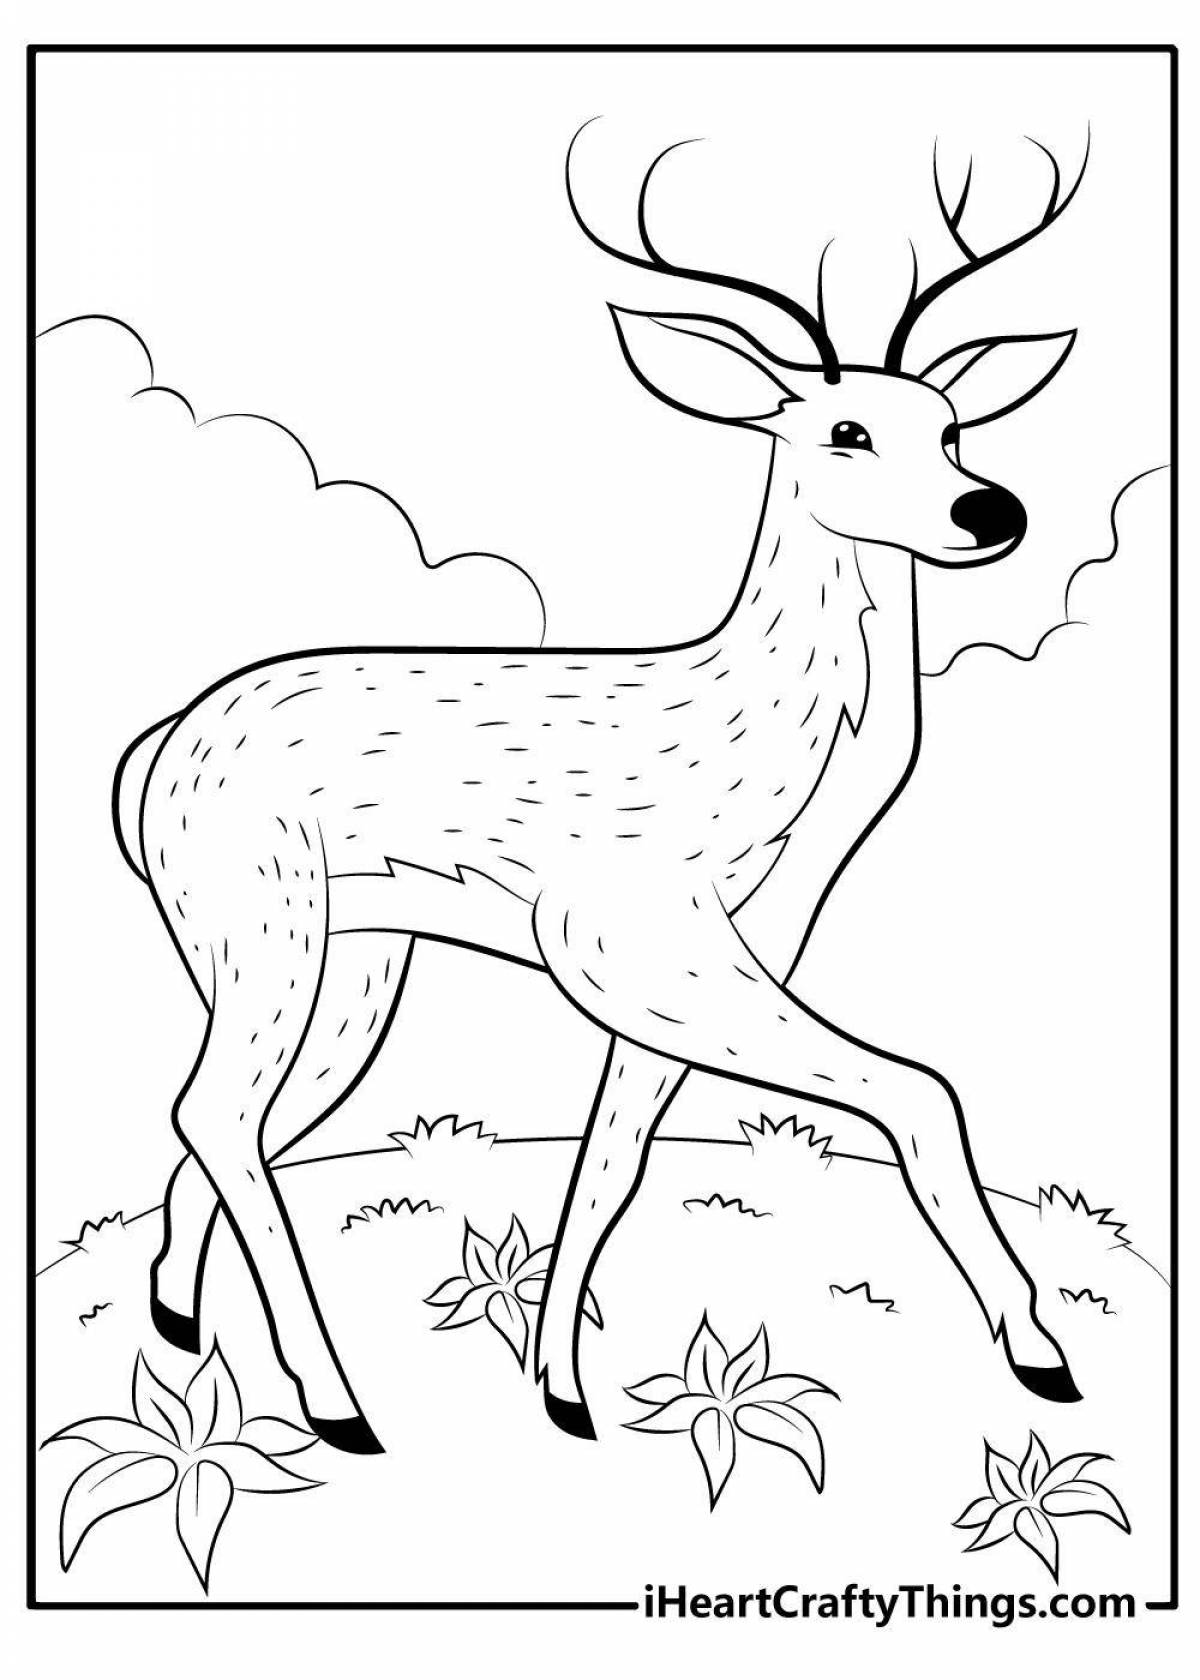 Amazing deer coloring book for kids 3-4 years old